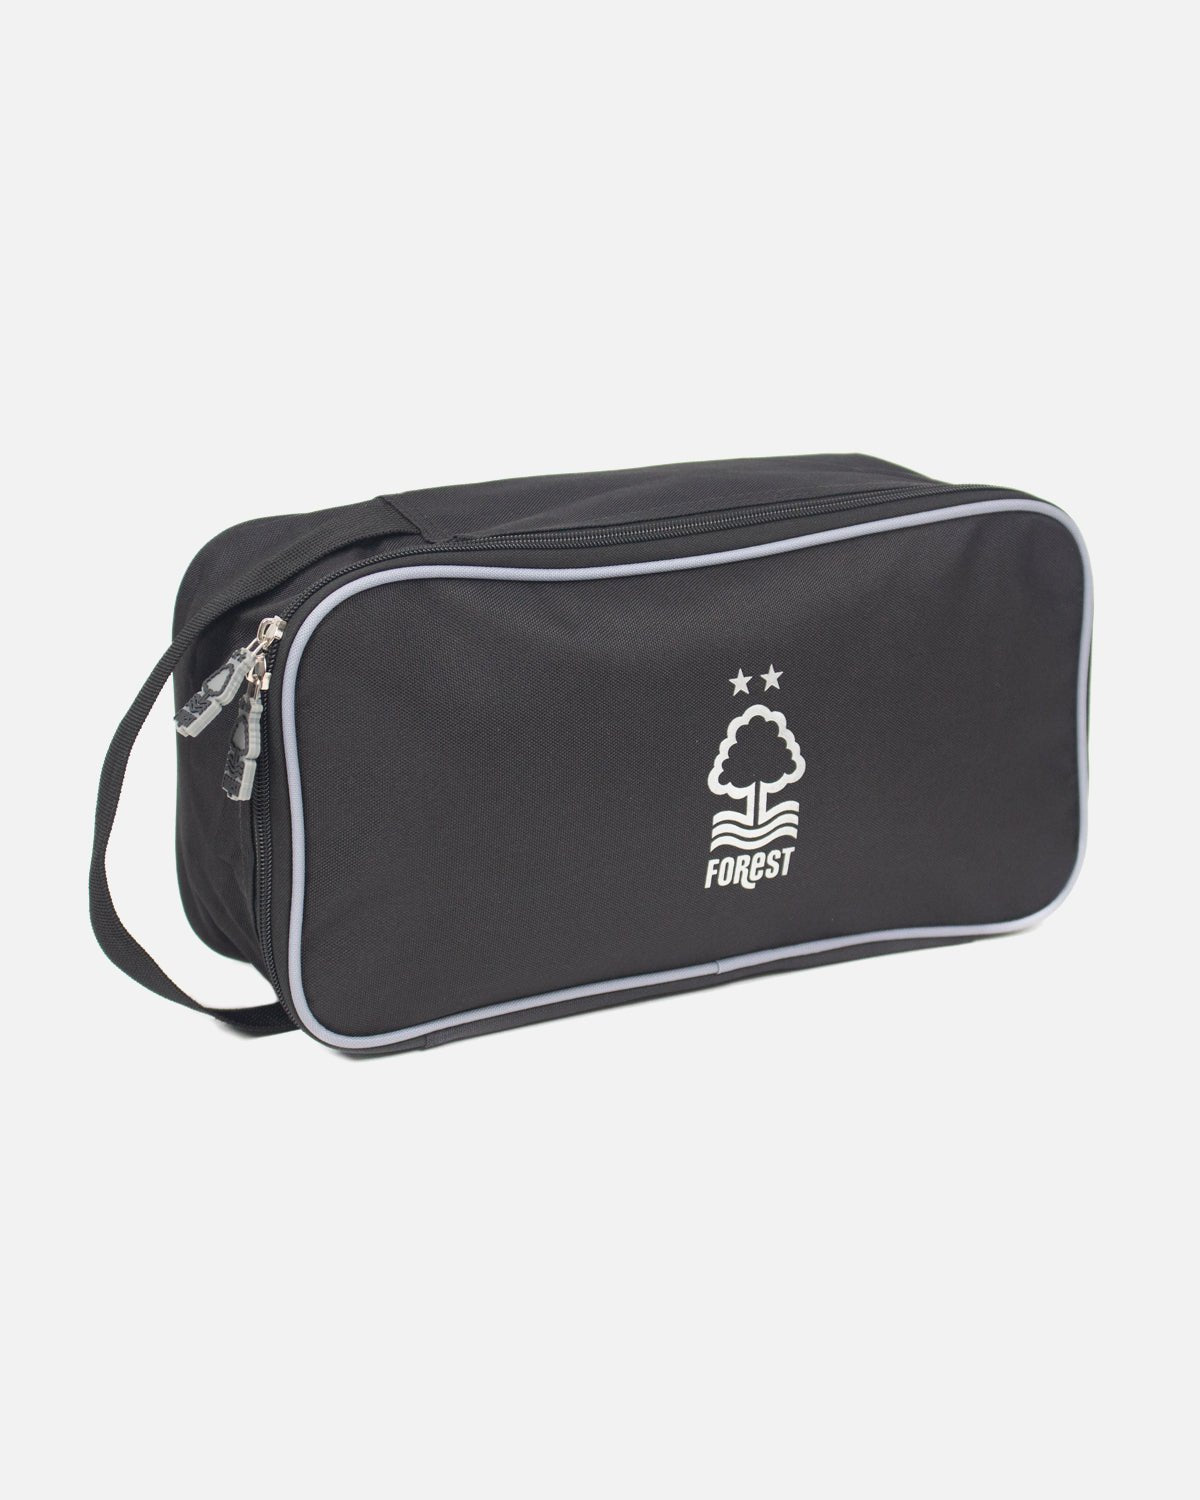 NFFC Recycled Bootbag - Nottingham Forest FC